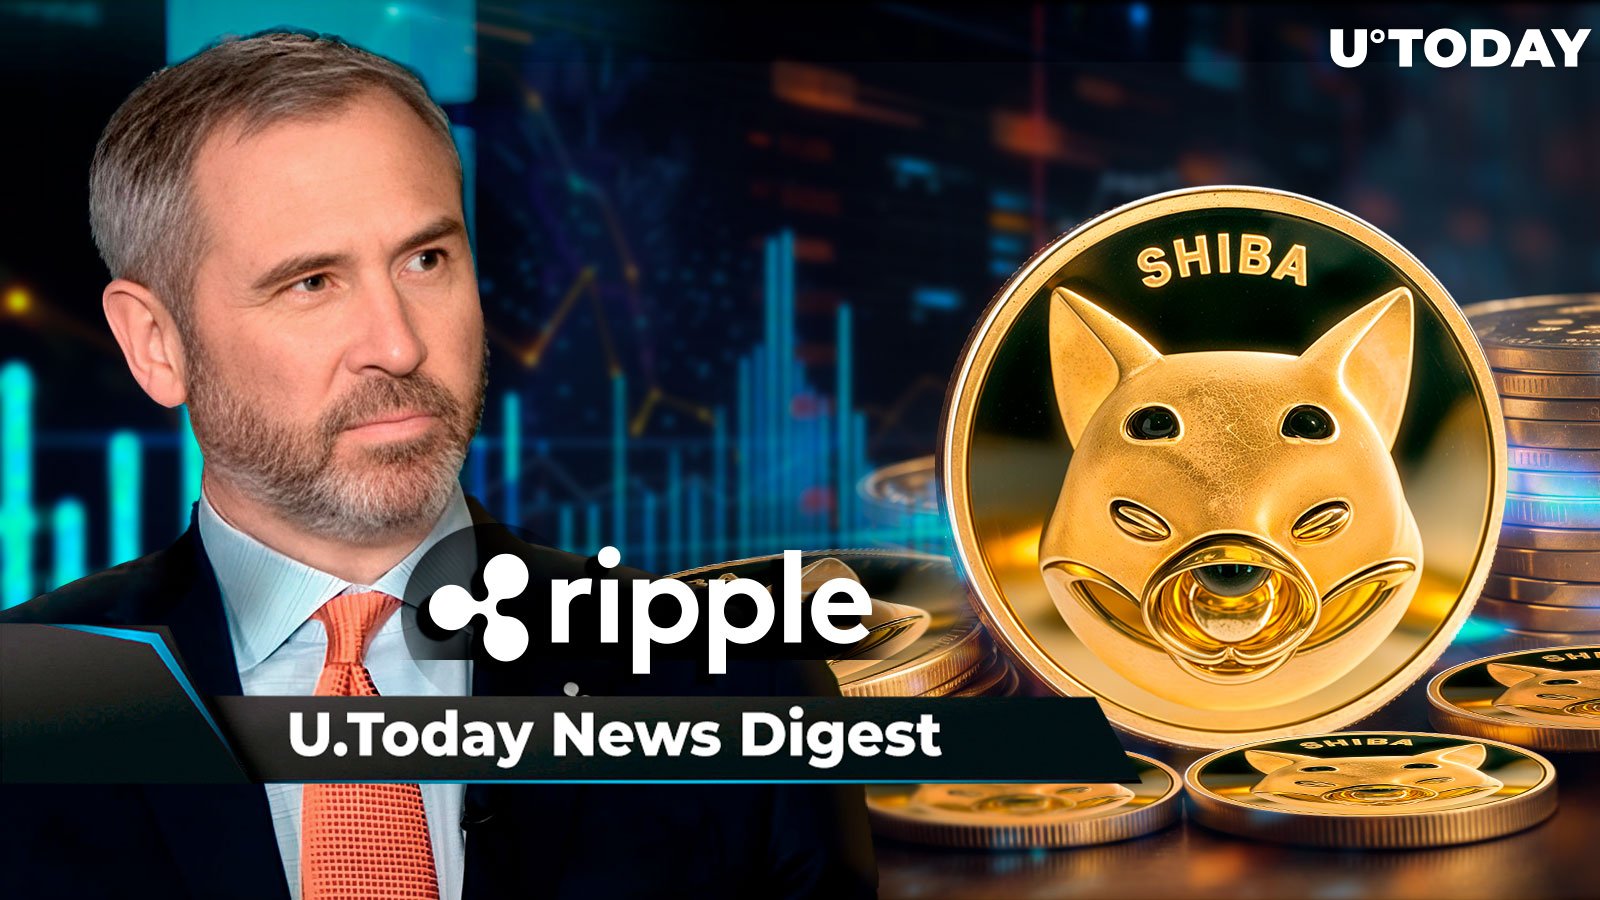 SHIB Scores Listing on Major Solana-Centered Exchange, Ripple Forms Coalition With Crypto Heavyweights, Gabor Gurbacs Notes Bitcoin's 17,400% Surge: Crypto News Digest by U.Today